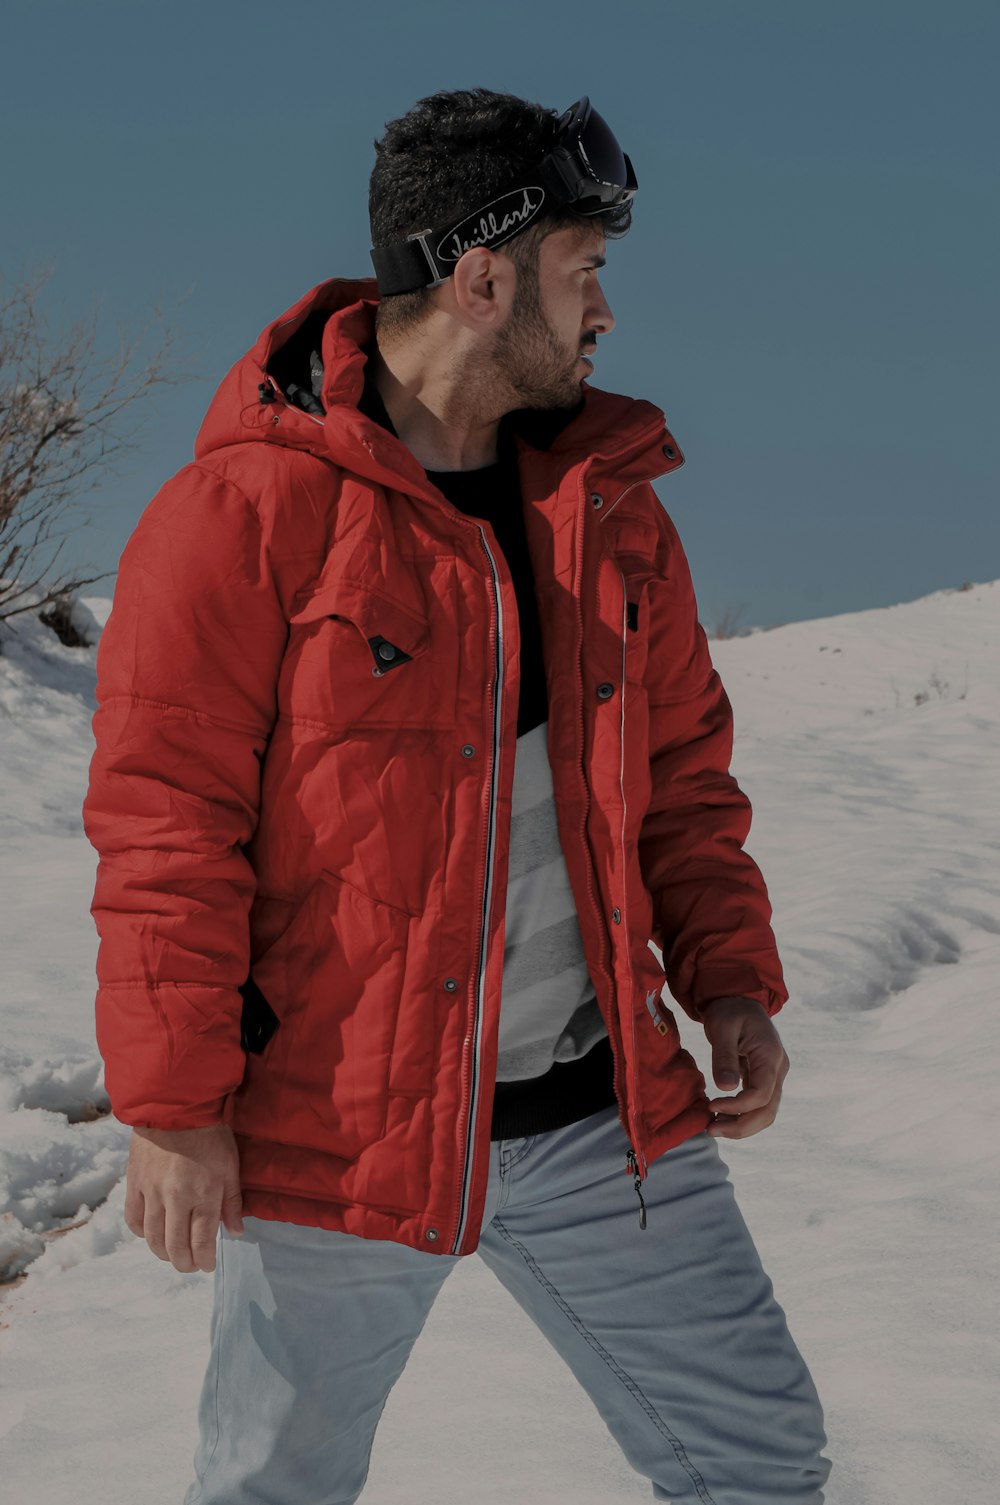 man in red zip up jacket standing on snow covered ground during daytime